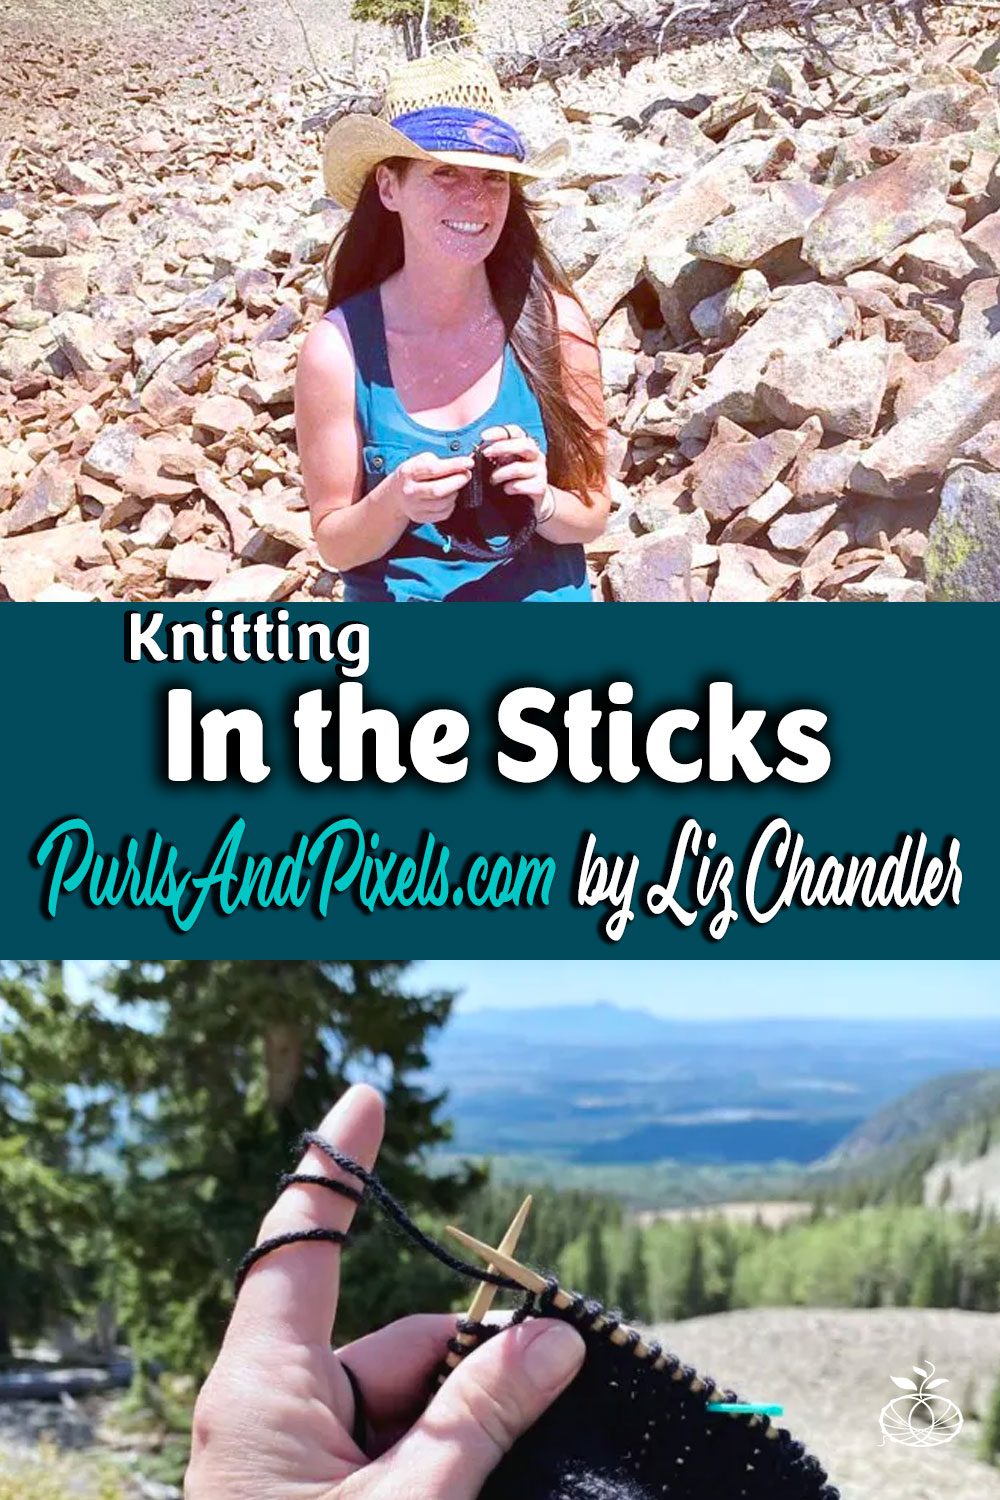 Knitting in the Sticks